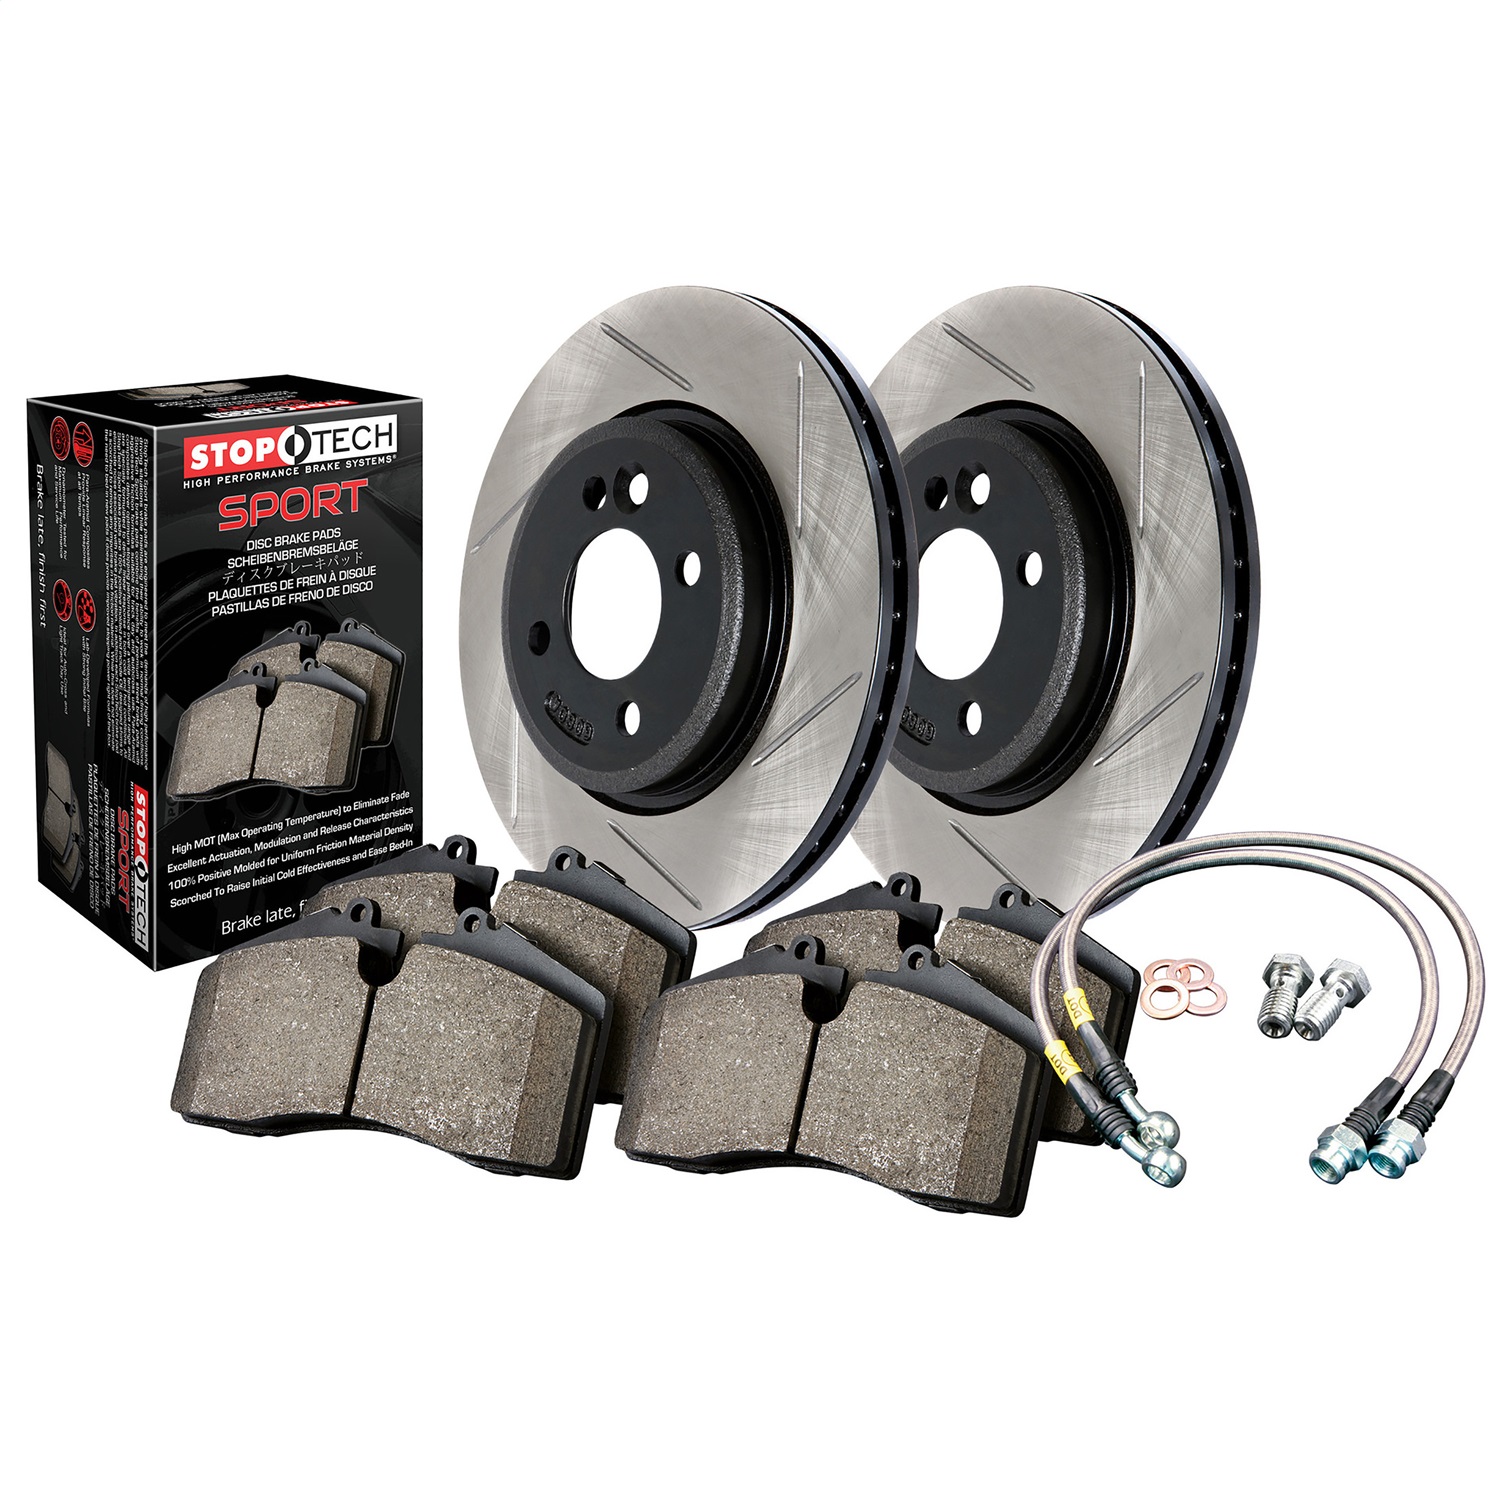 StopTech 977.34015F Sport Disc Brake Kit w/Slotted Rotors